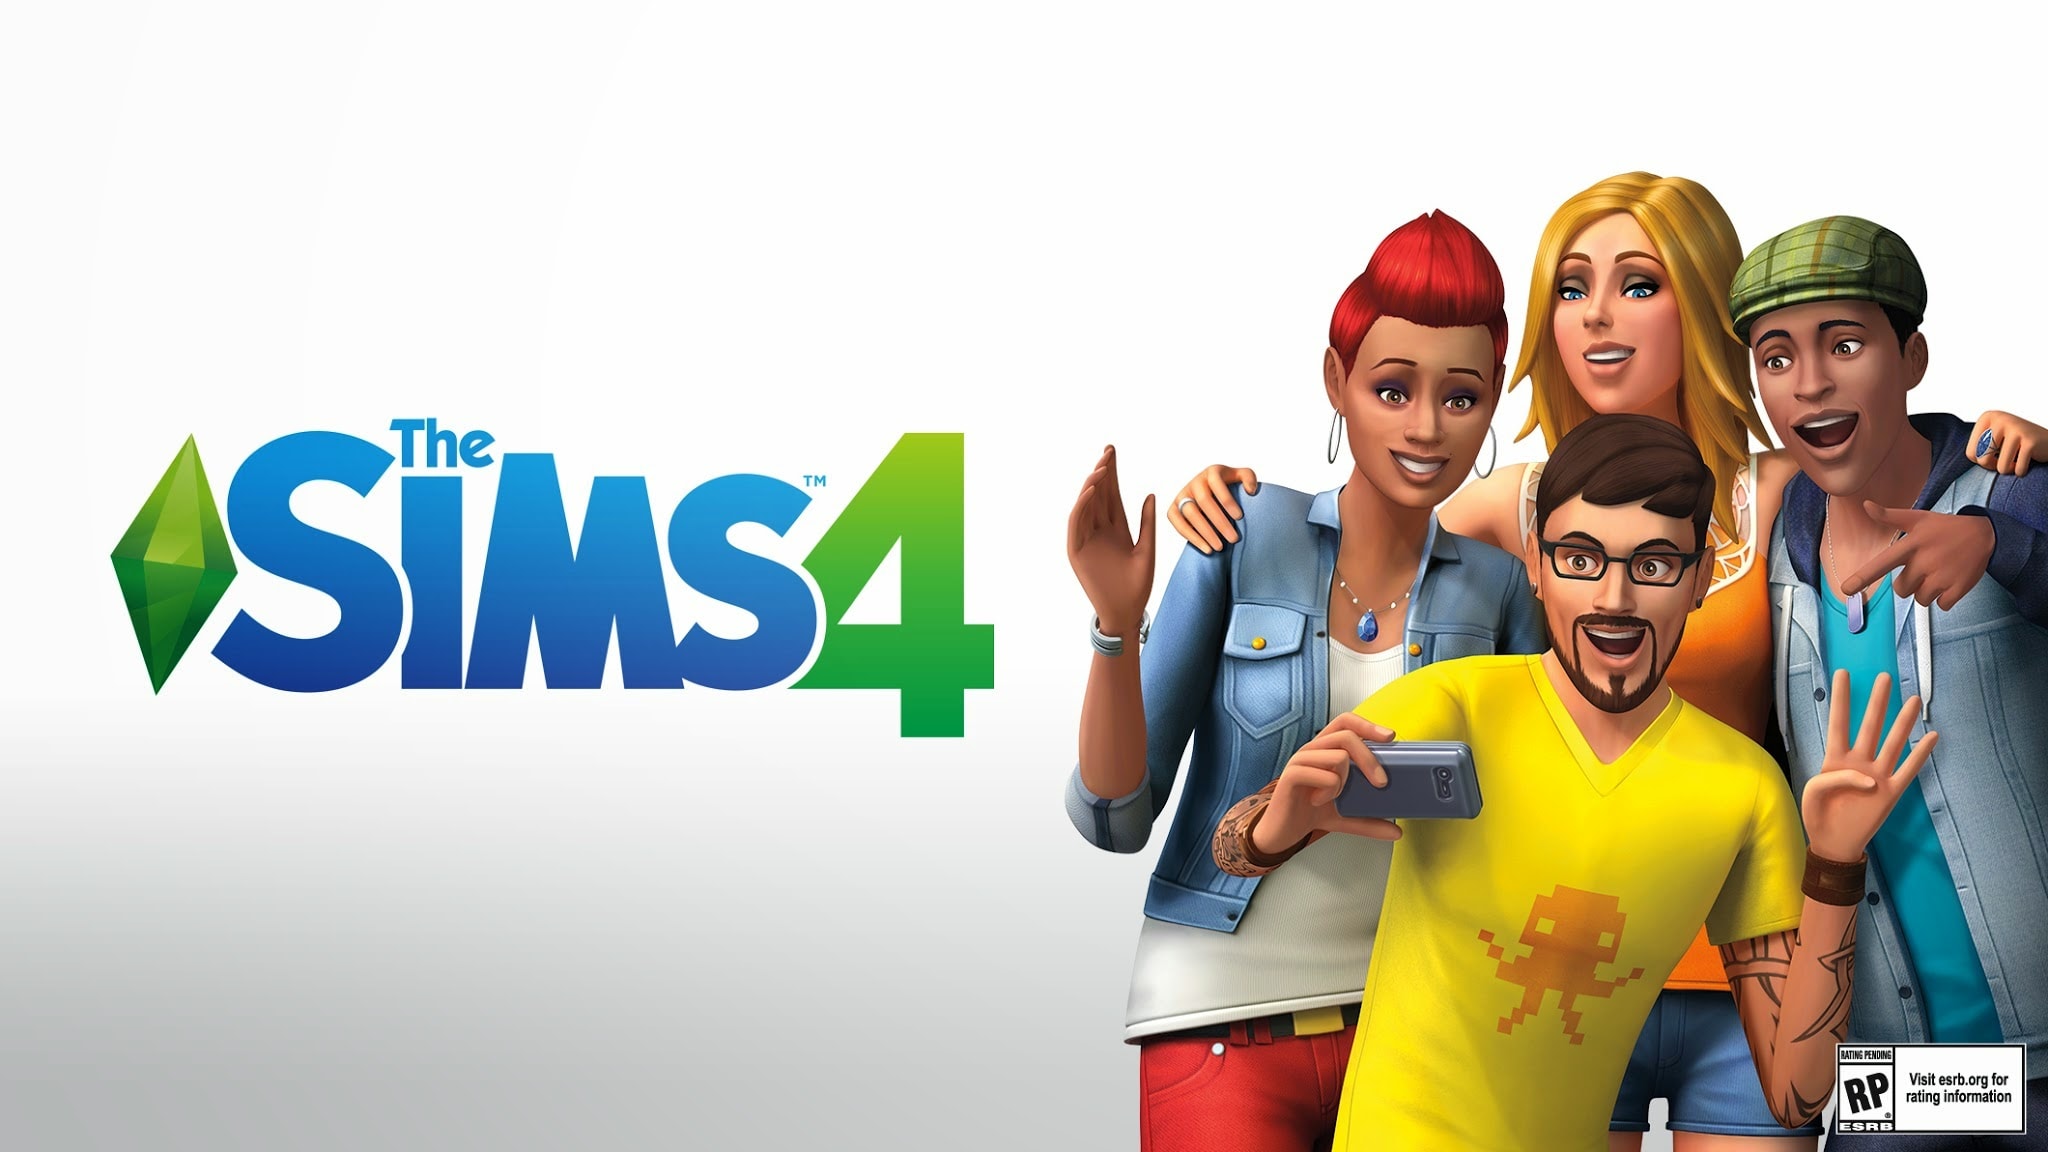 The Sims 4 for Mac and PC is free for a limited time